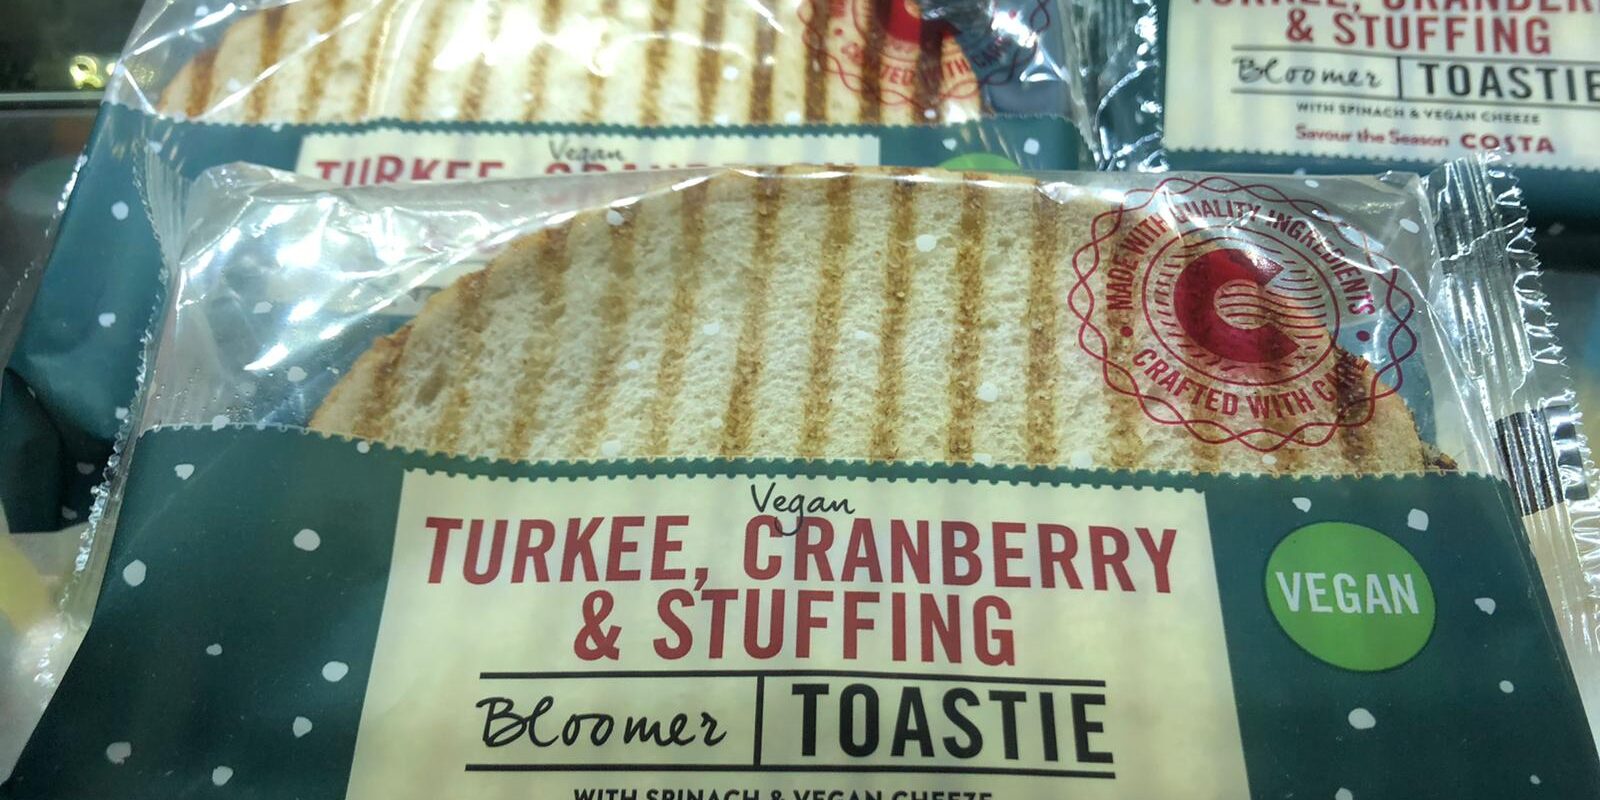 Picture of the packaging of a vegan turkey, cranberry and stuffing toastie from Costa.